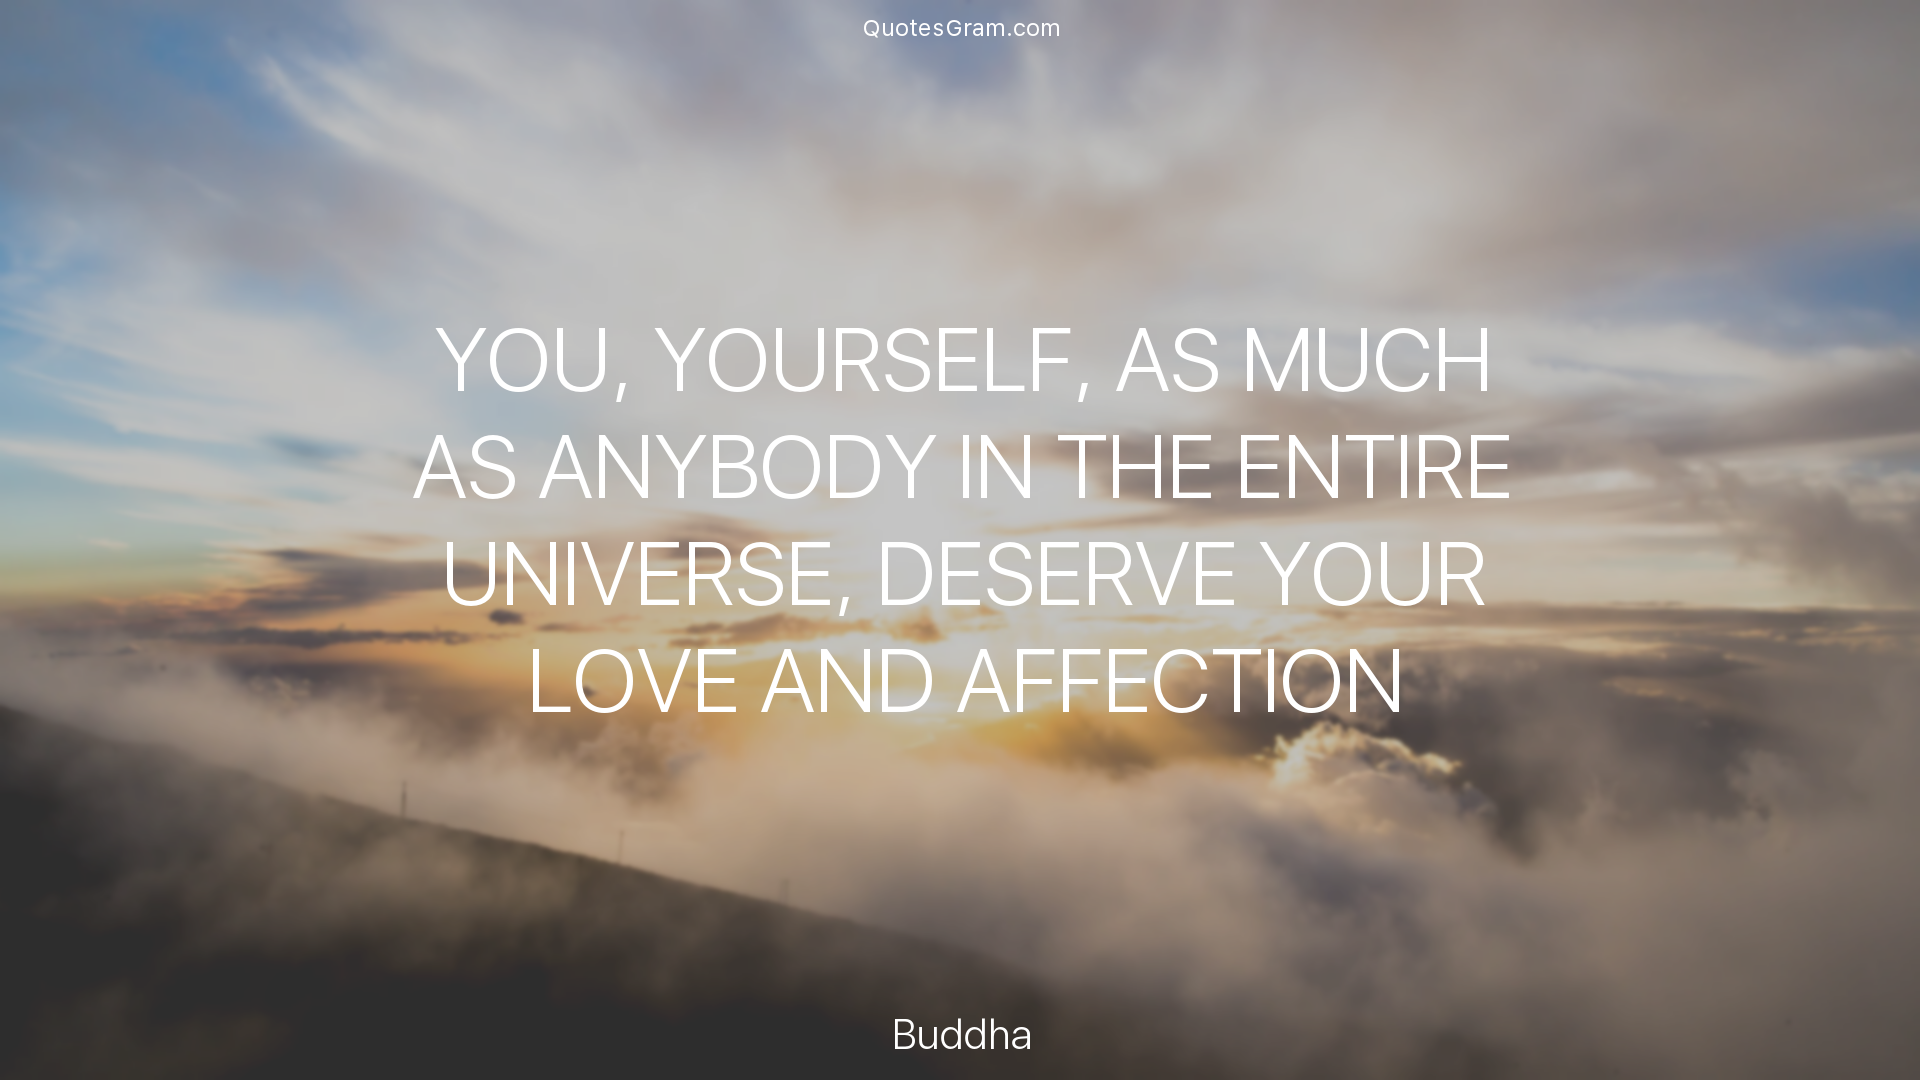 buddha-quote-you-yourself-as-much-as-anybody-in-the-entire-universe.png